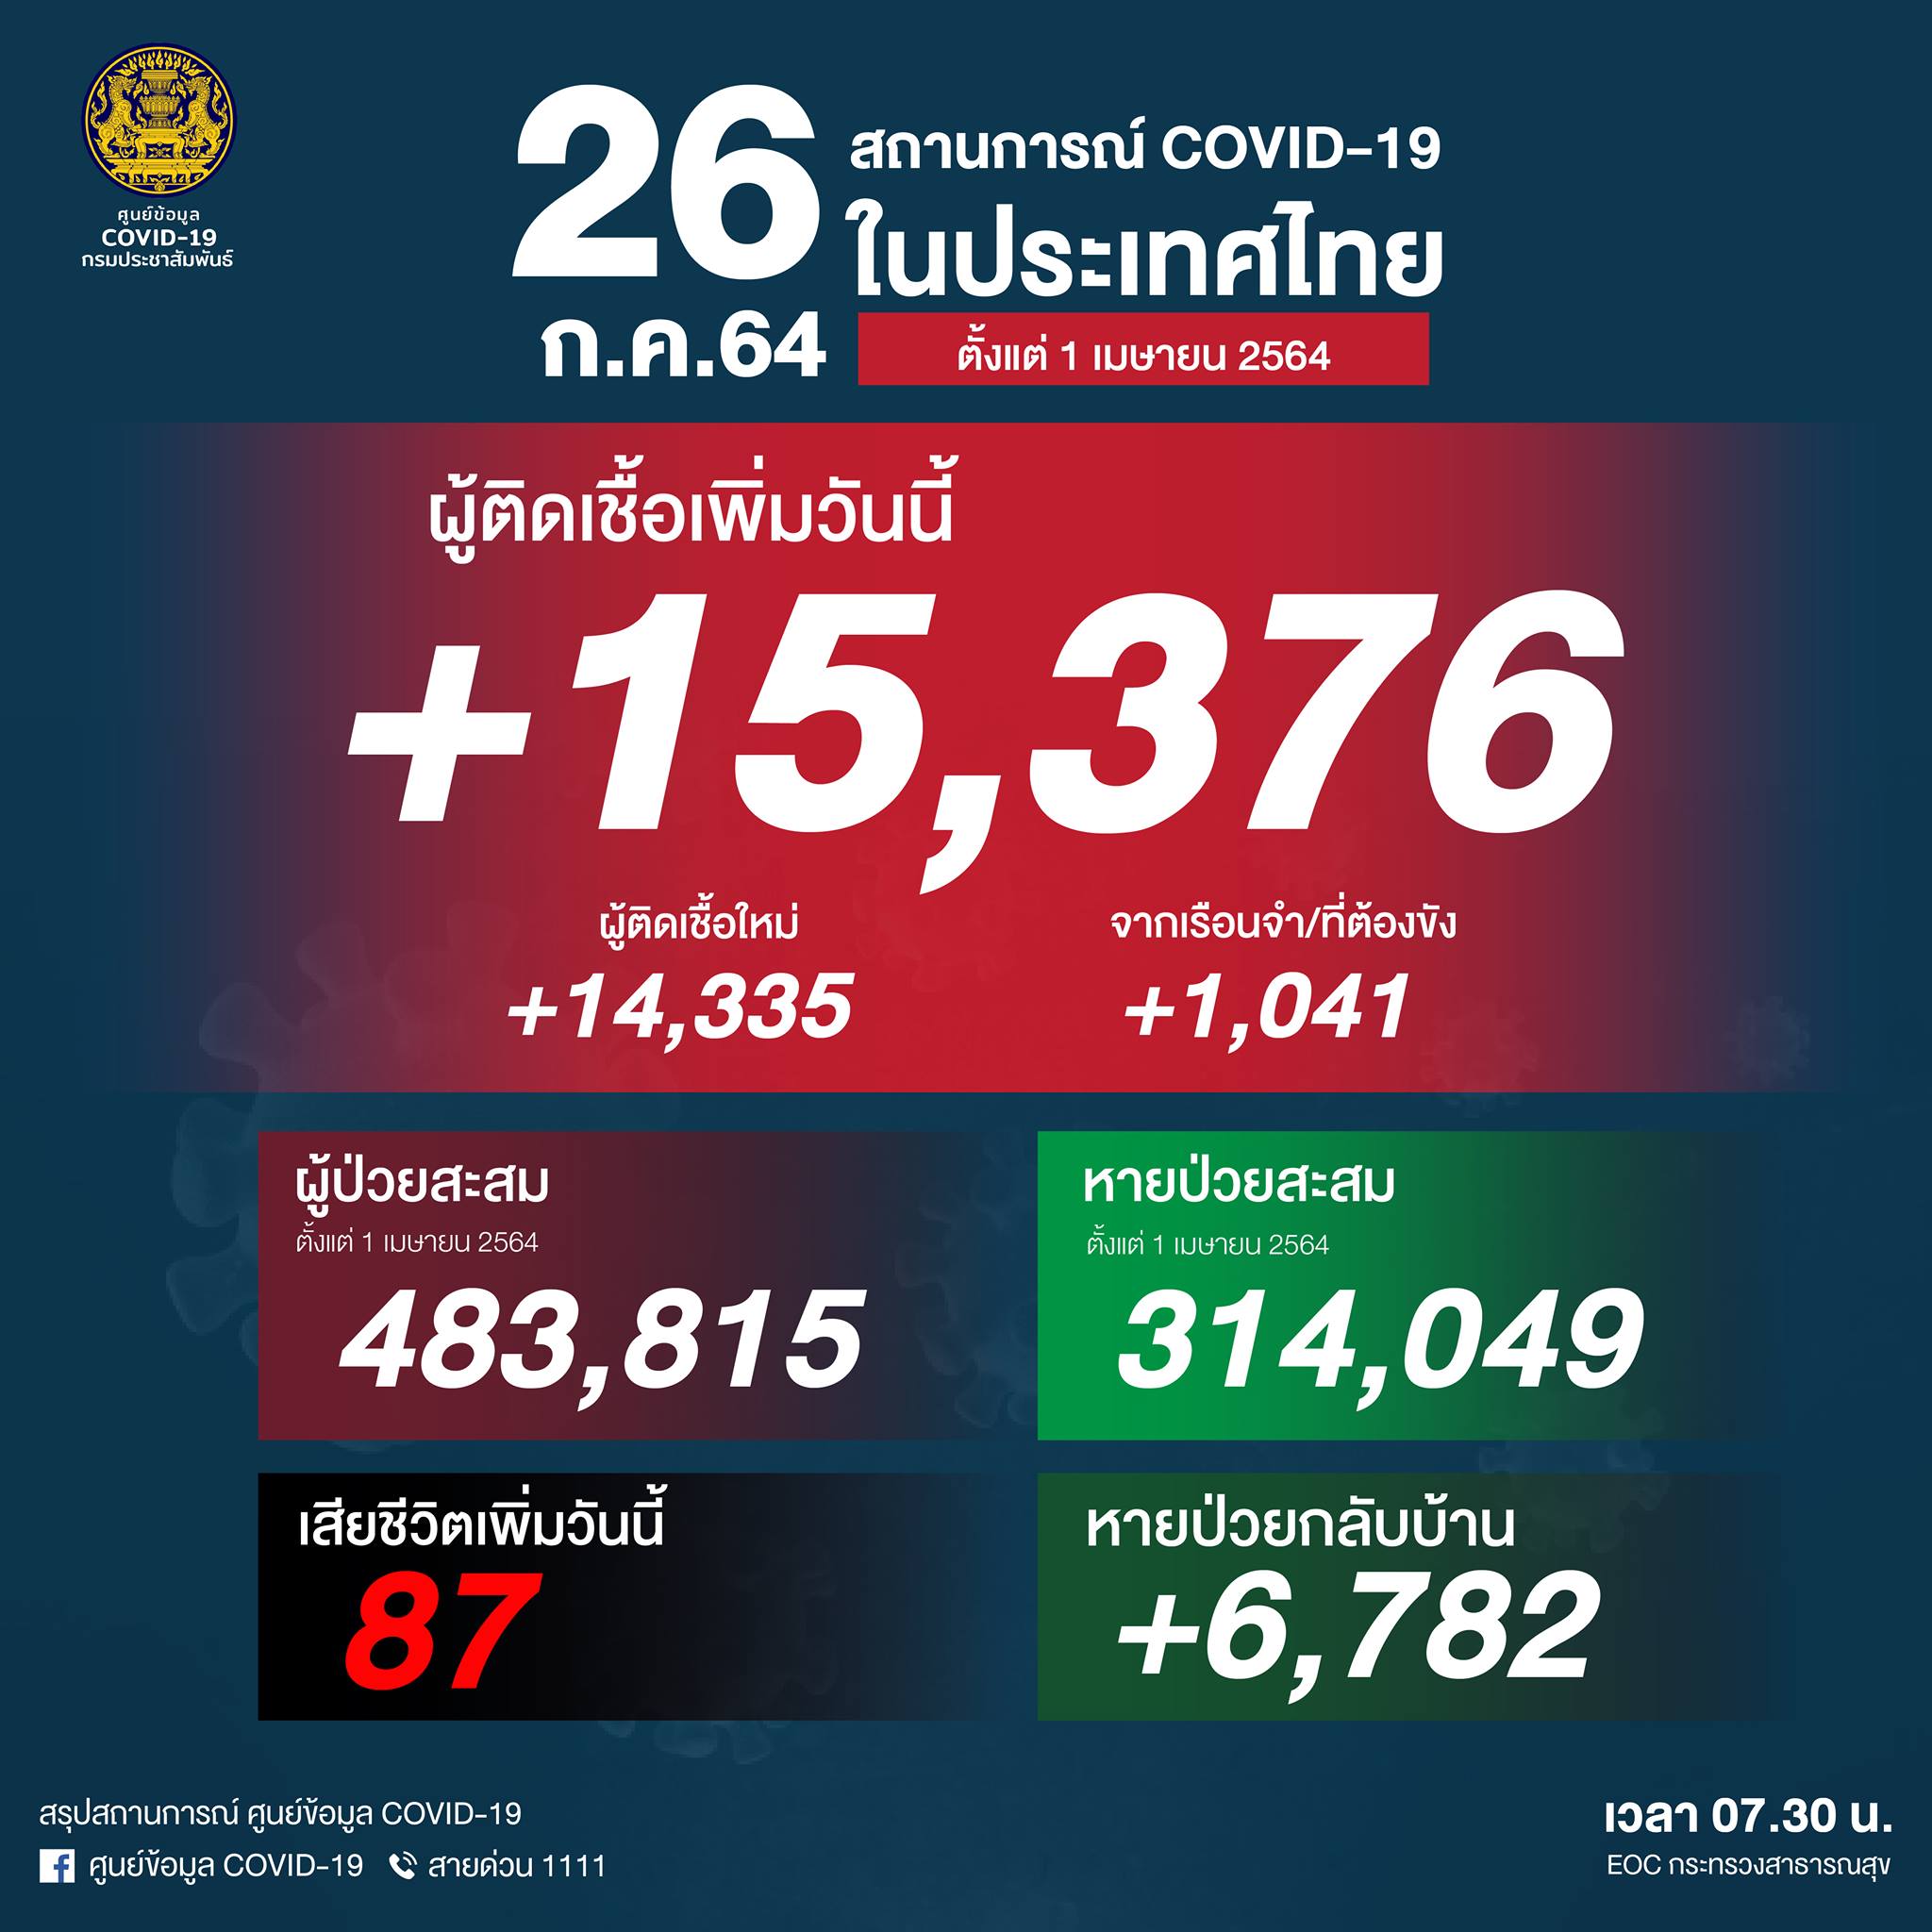 Thailand&#39;s Ministry of Health reports 15,376 new cases of coronavirus today  (July 26), with 87 deaths. - Newsdir3